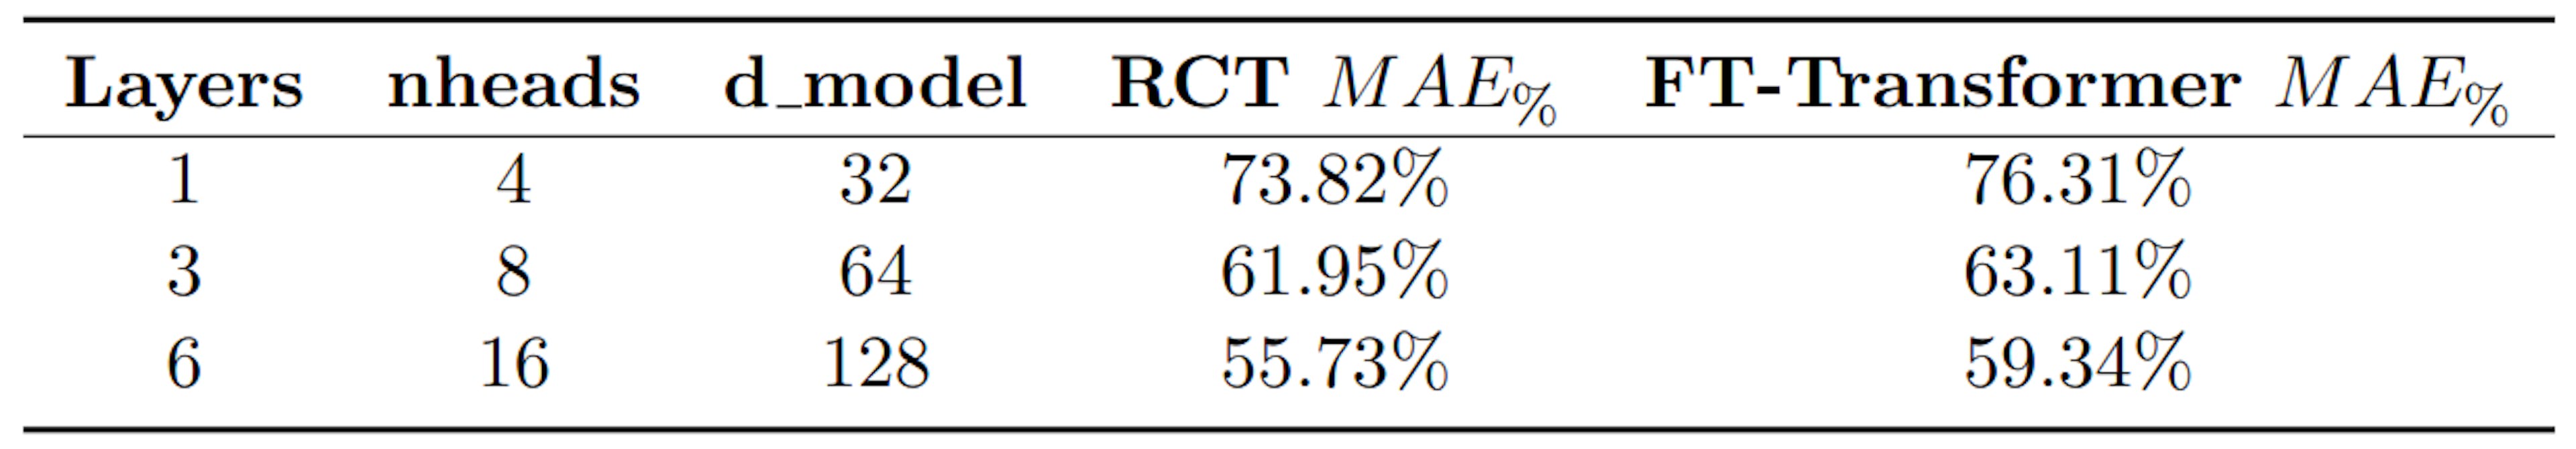 Table 2: MAE% comparison between RCT and FT-Transformer (SOTA for self-attention models)